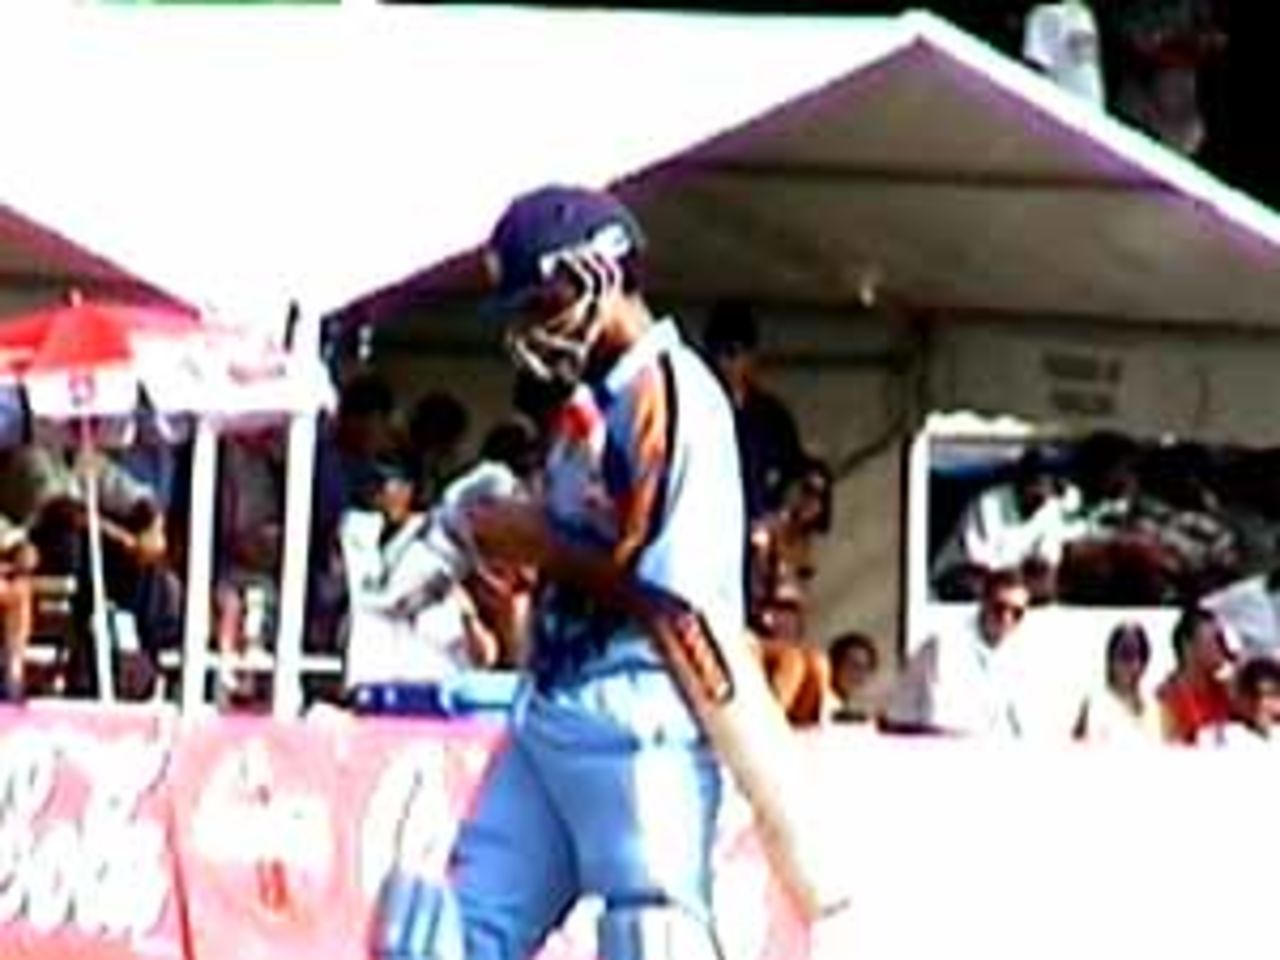 Ganguly makes the long walk back from the wicket to the dressing room, India v West Indies (3rd ODI), Coca-Cola Singapore Challenge, 1999-2000, Kallang Ground, Singapore, 5 Sep 1999.